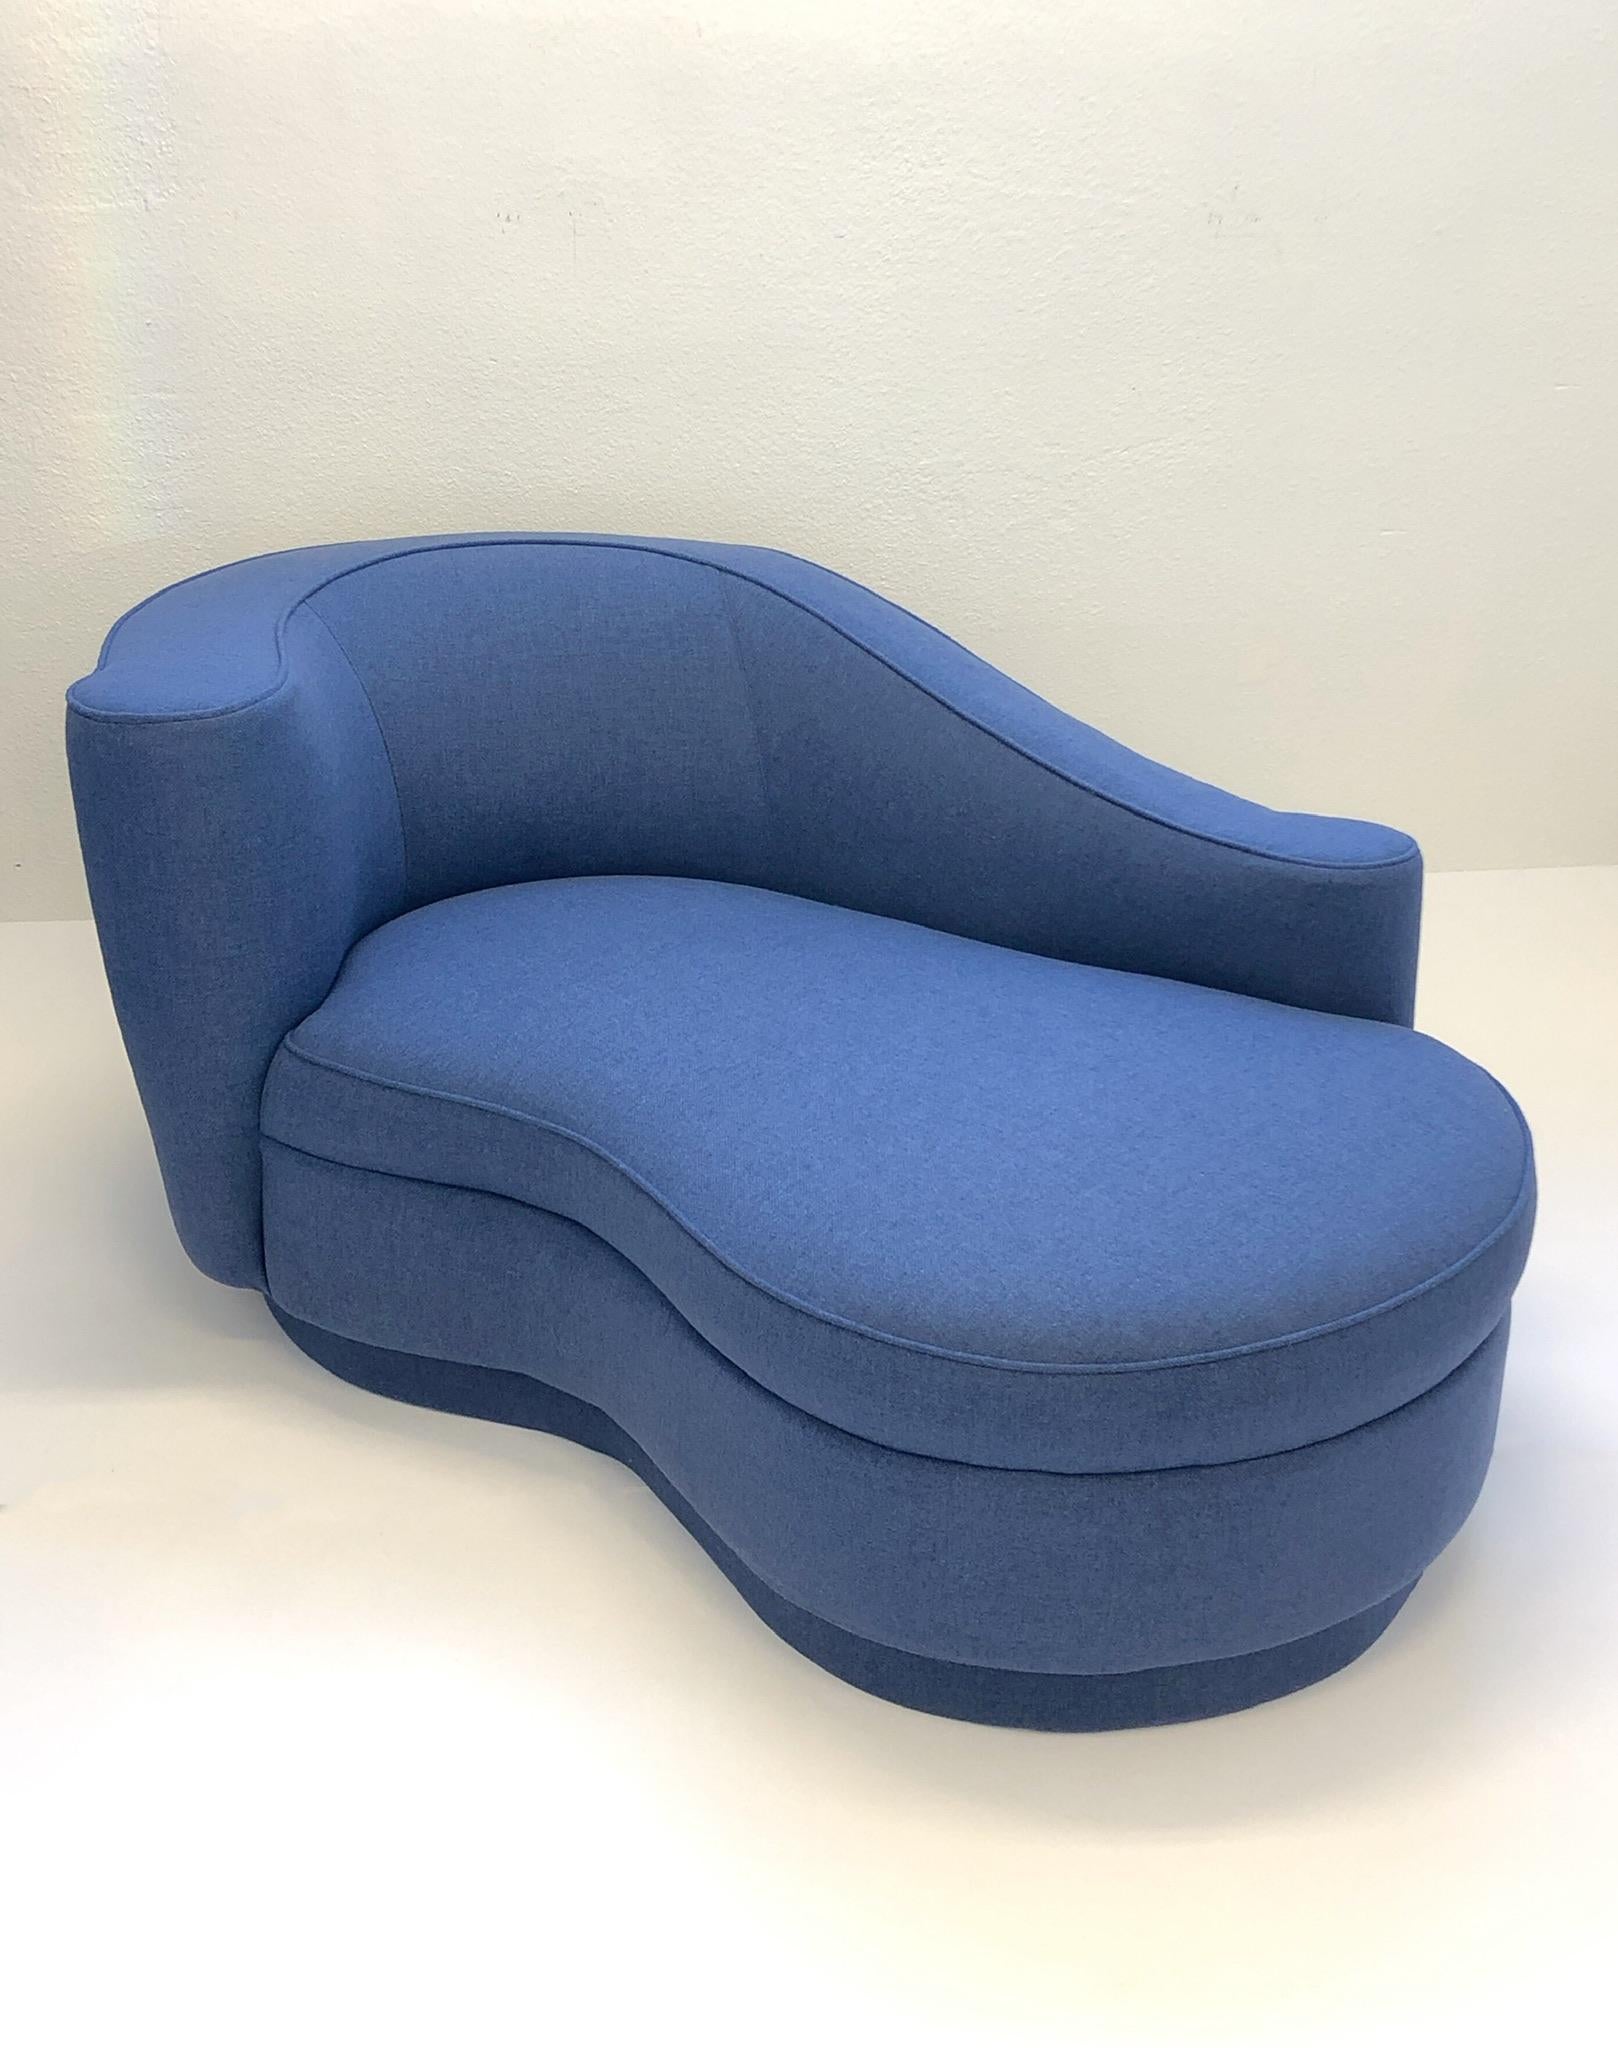 A spectacular “Corkscrew” chaise lounge. The chaise is upholstered in a blue knoll fabric. 

Dimensions: 30” high, 64” wide, 38” deep.